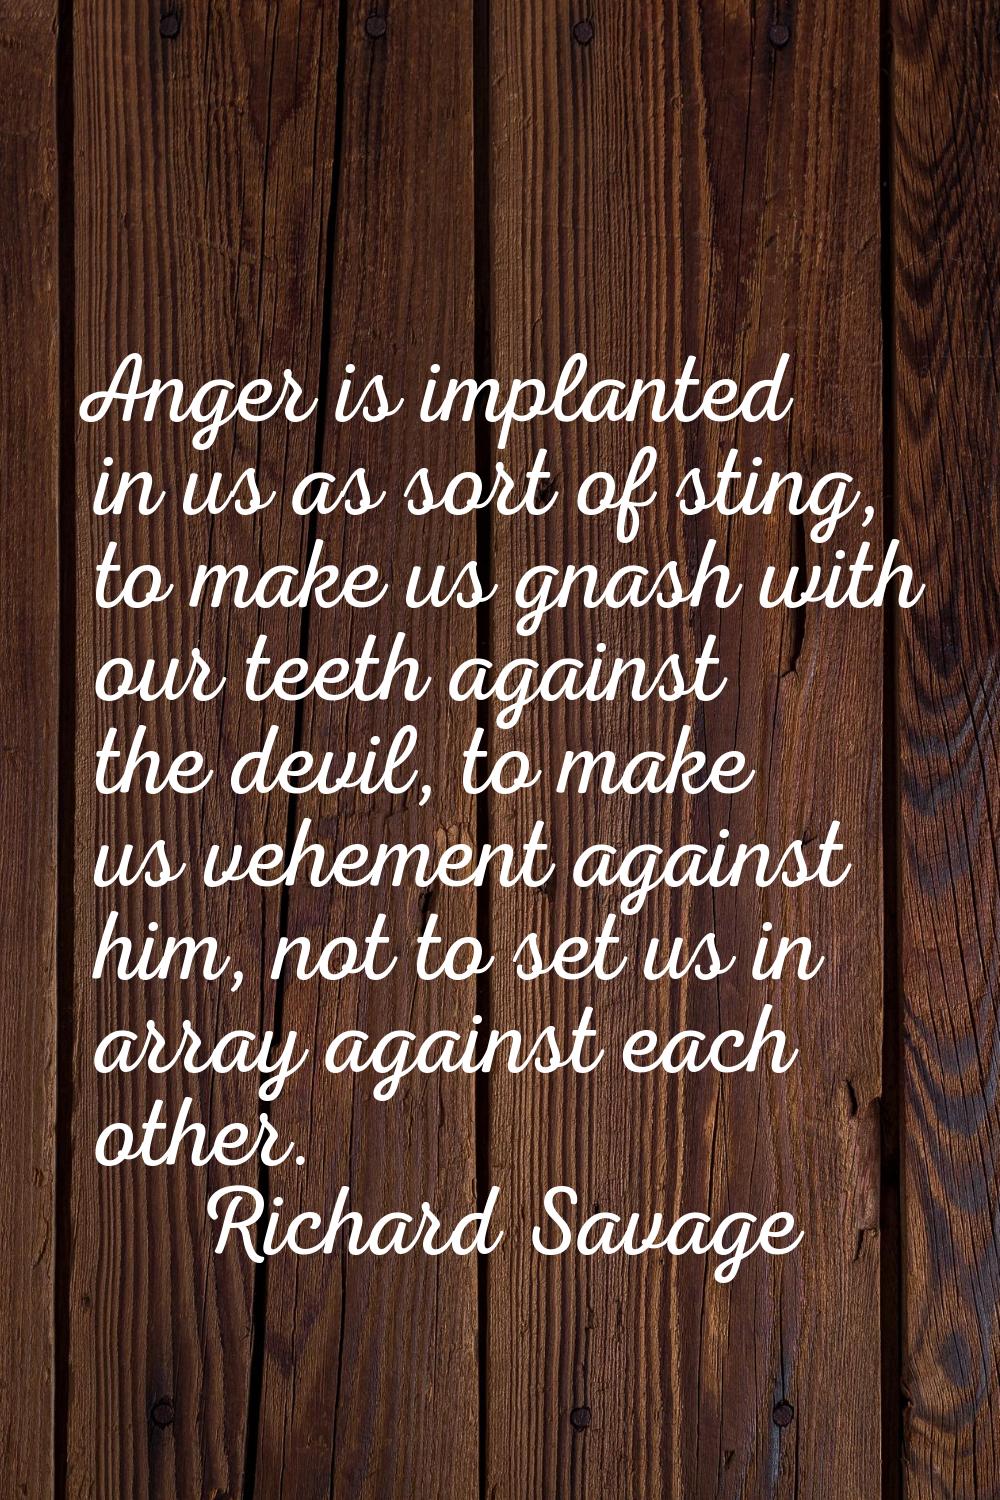 Anger is implanted in us as sort of sting, to make us gnash with our teeth against the devil, to ma